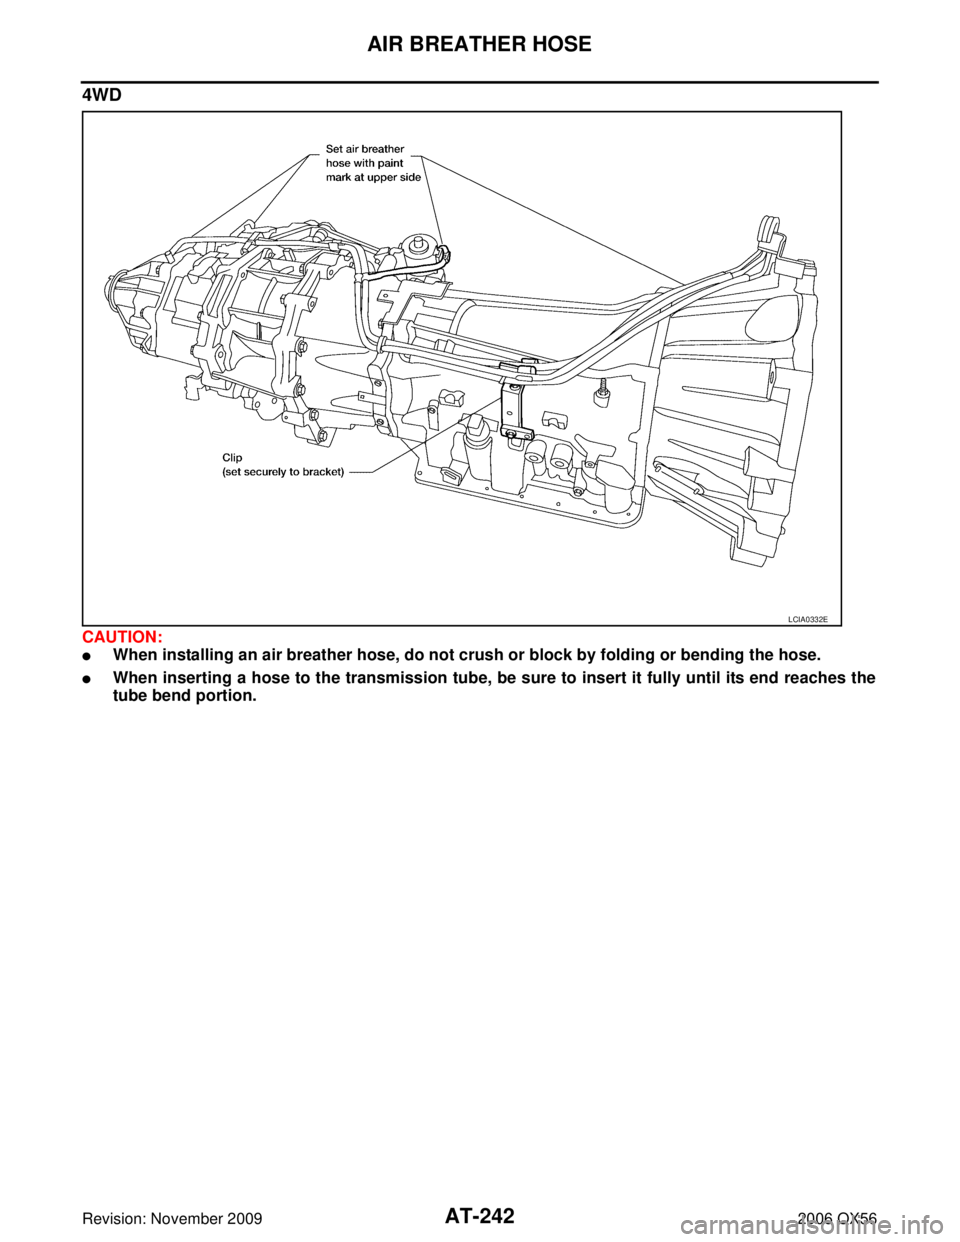 INFINITI QX56 2006  Factory Service Manual AT-242
AIR BREATHER HOSE
Revision: November 20092006 QX56
4WD
CAUTION:
When installing an air breather hose, do not crush or block by folding or bending the hose.
When inserting a hose to the transm